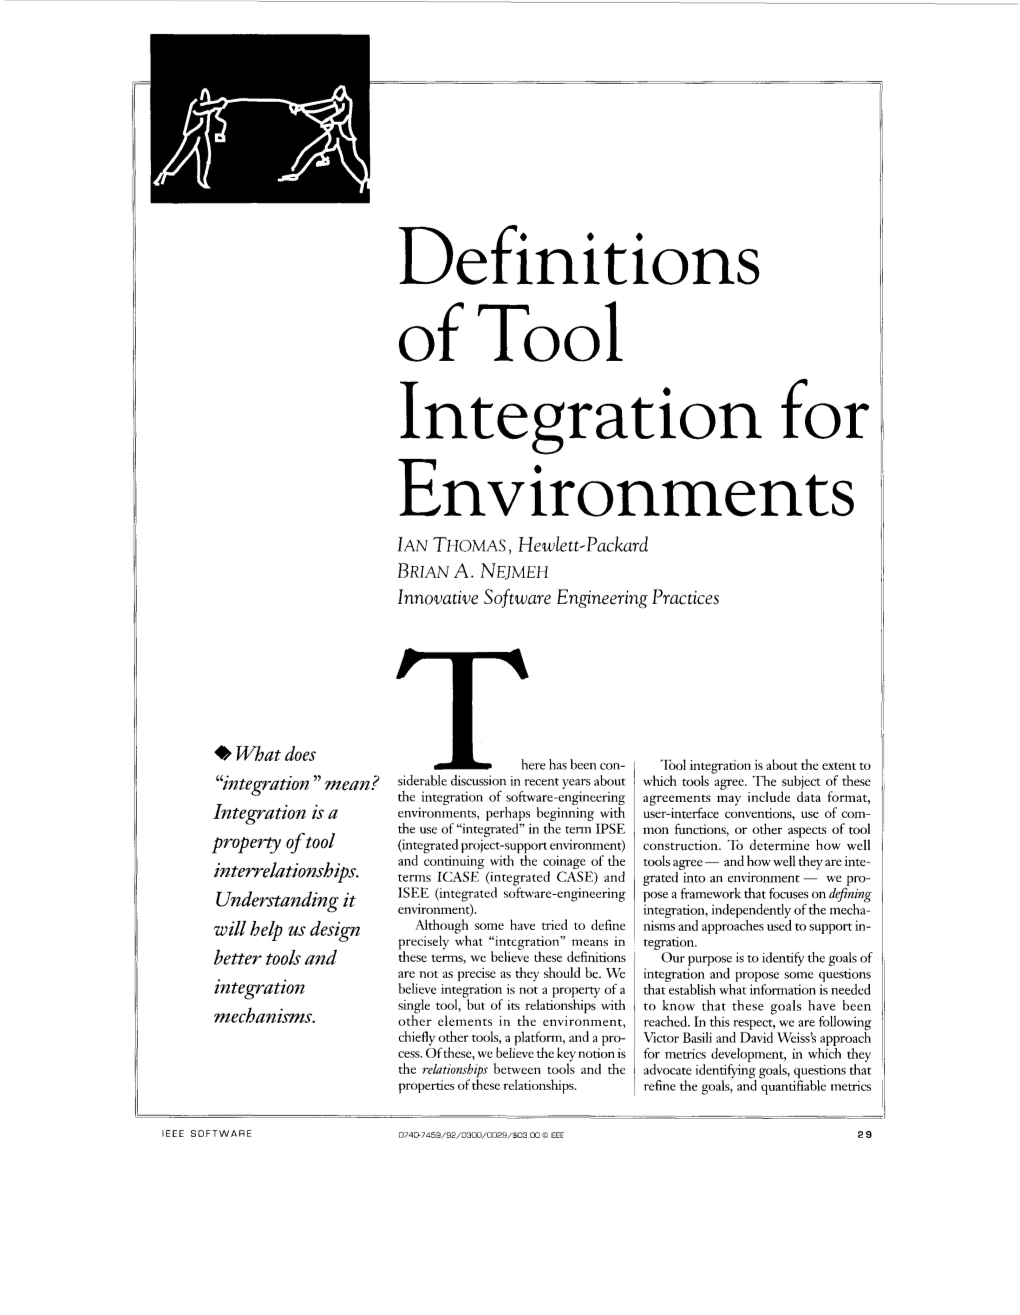 Definitions of Tool Integration for Environments